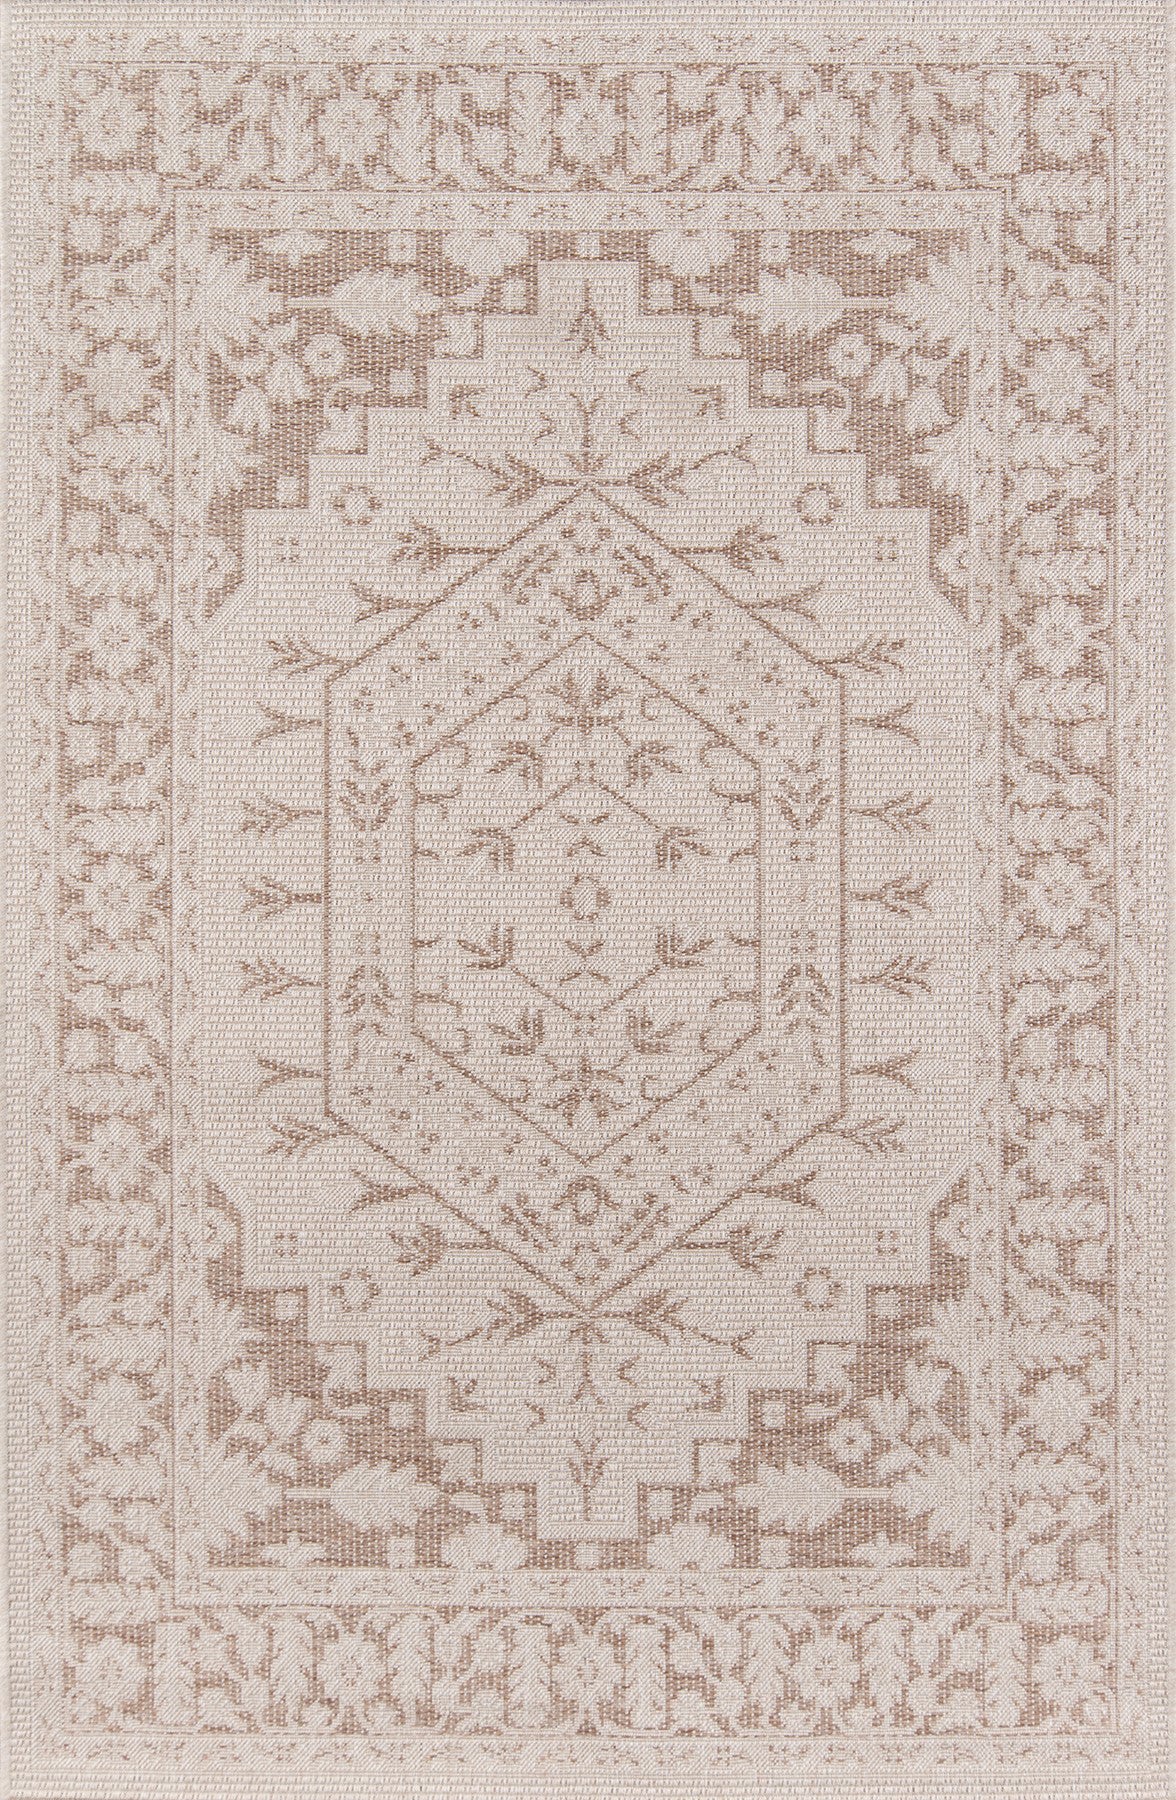 Momeni Downeast DOW-5 Beige Area Rug by Erin Gates main image